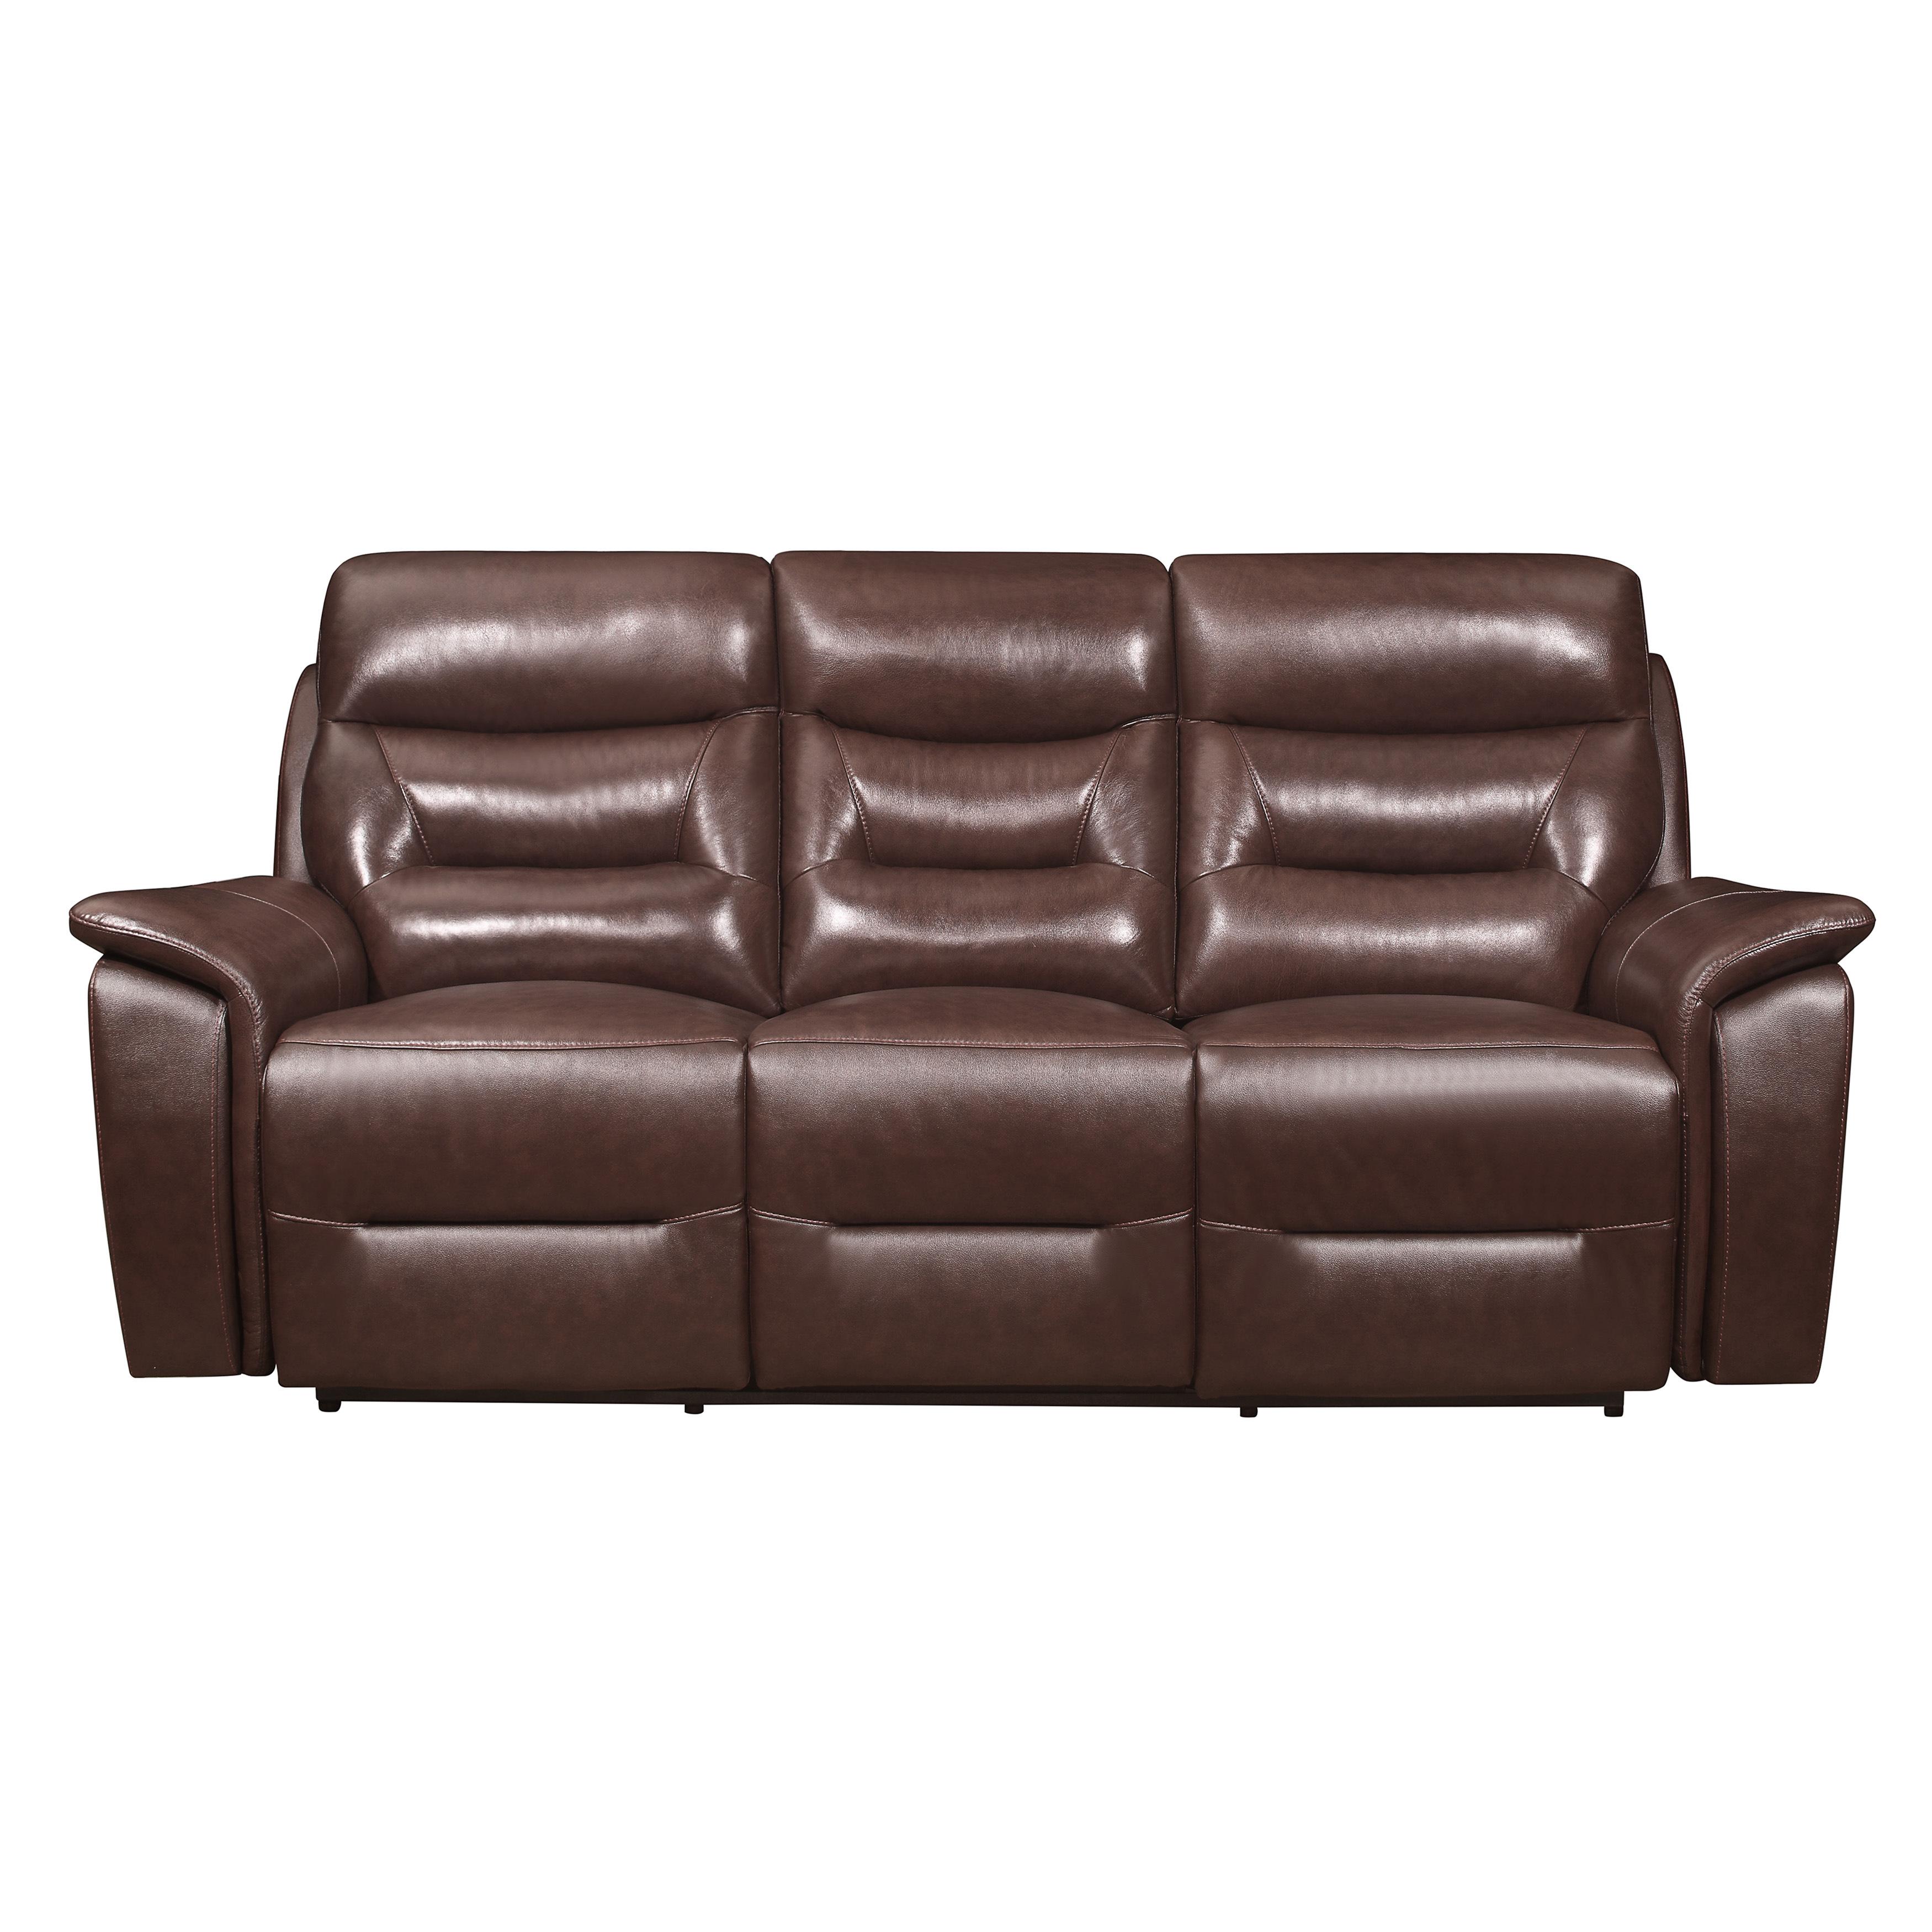 Transitional Power Reclining Sofa 9445BR-3PWH Armando 9445BR-3PWH in Brown Leather